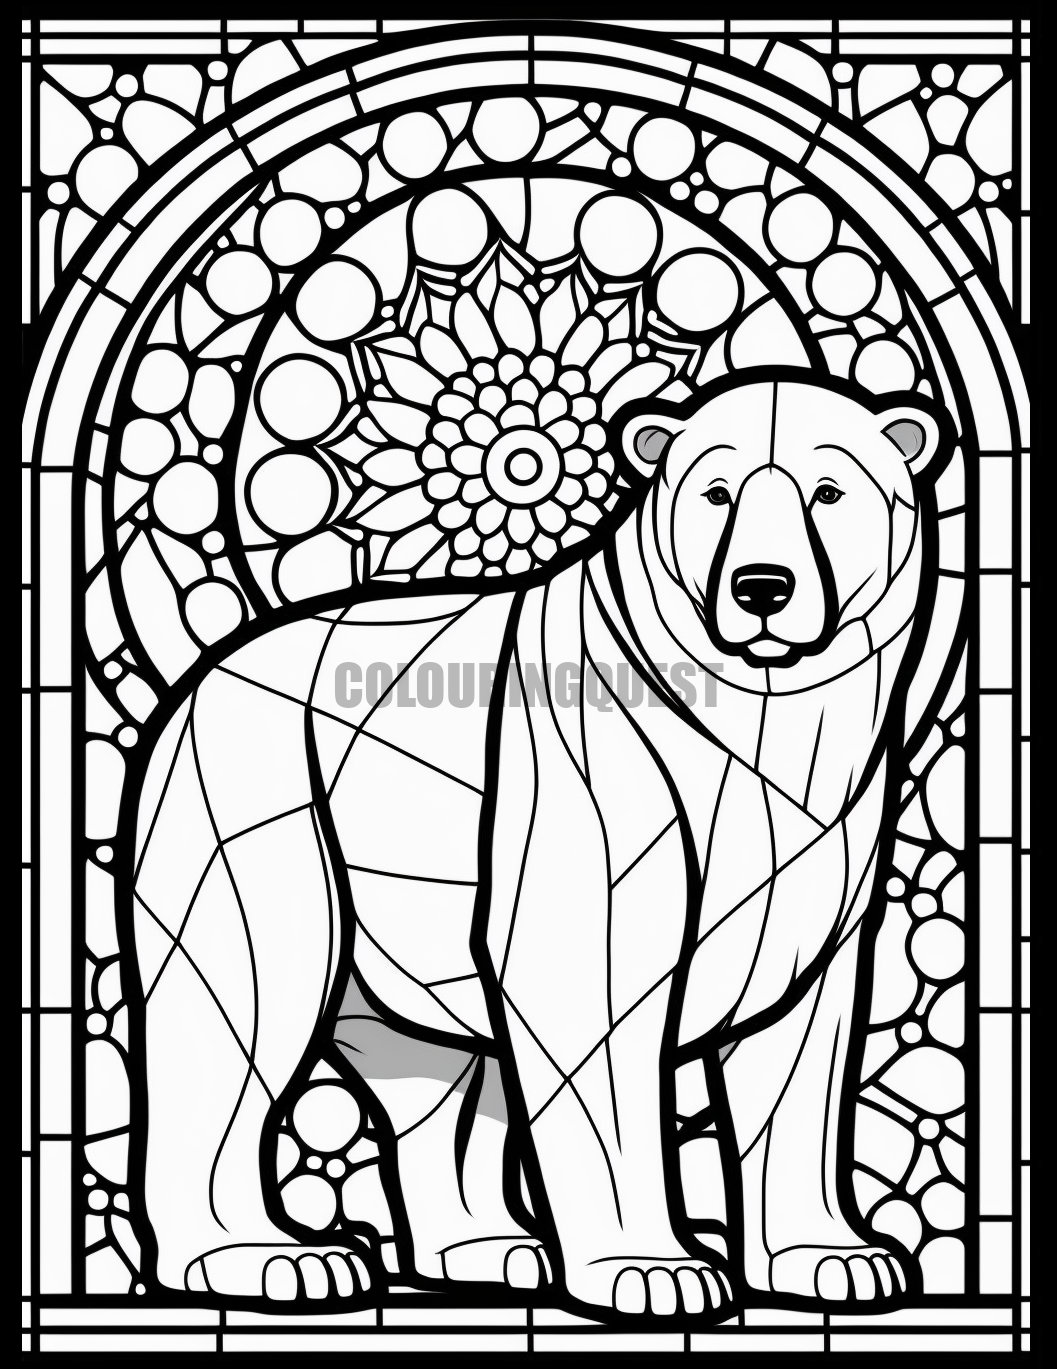 Polar bear stained glass printable adult coloring page from colouringquest coloring book pages for adults coloring pictures for kids